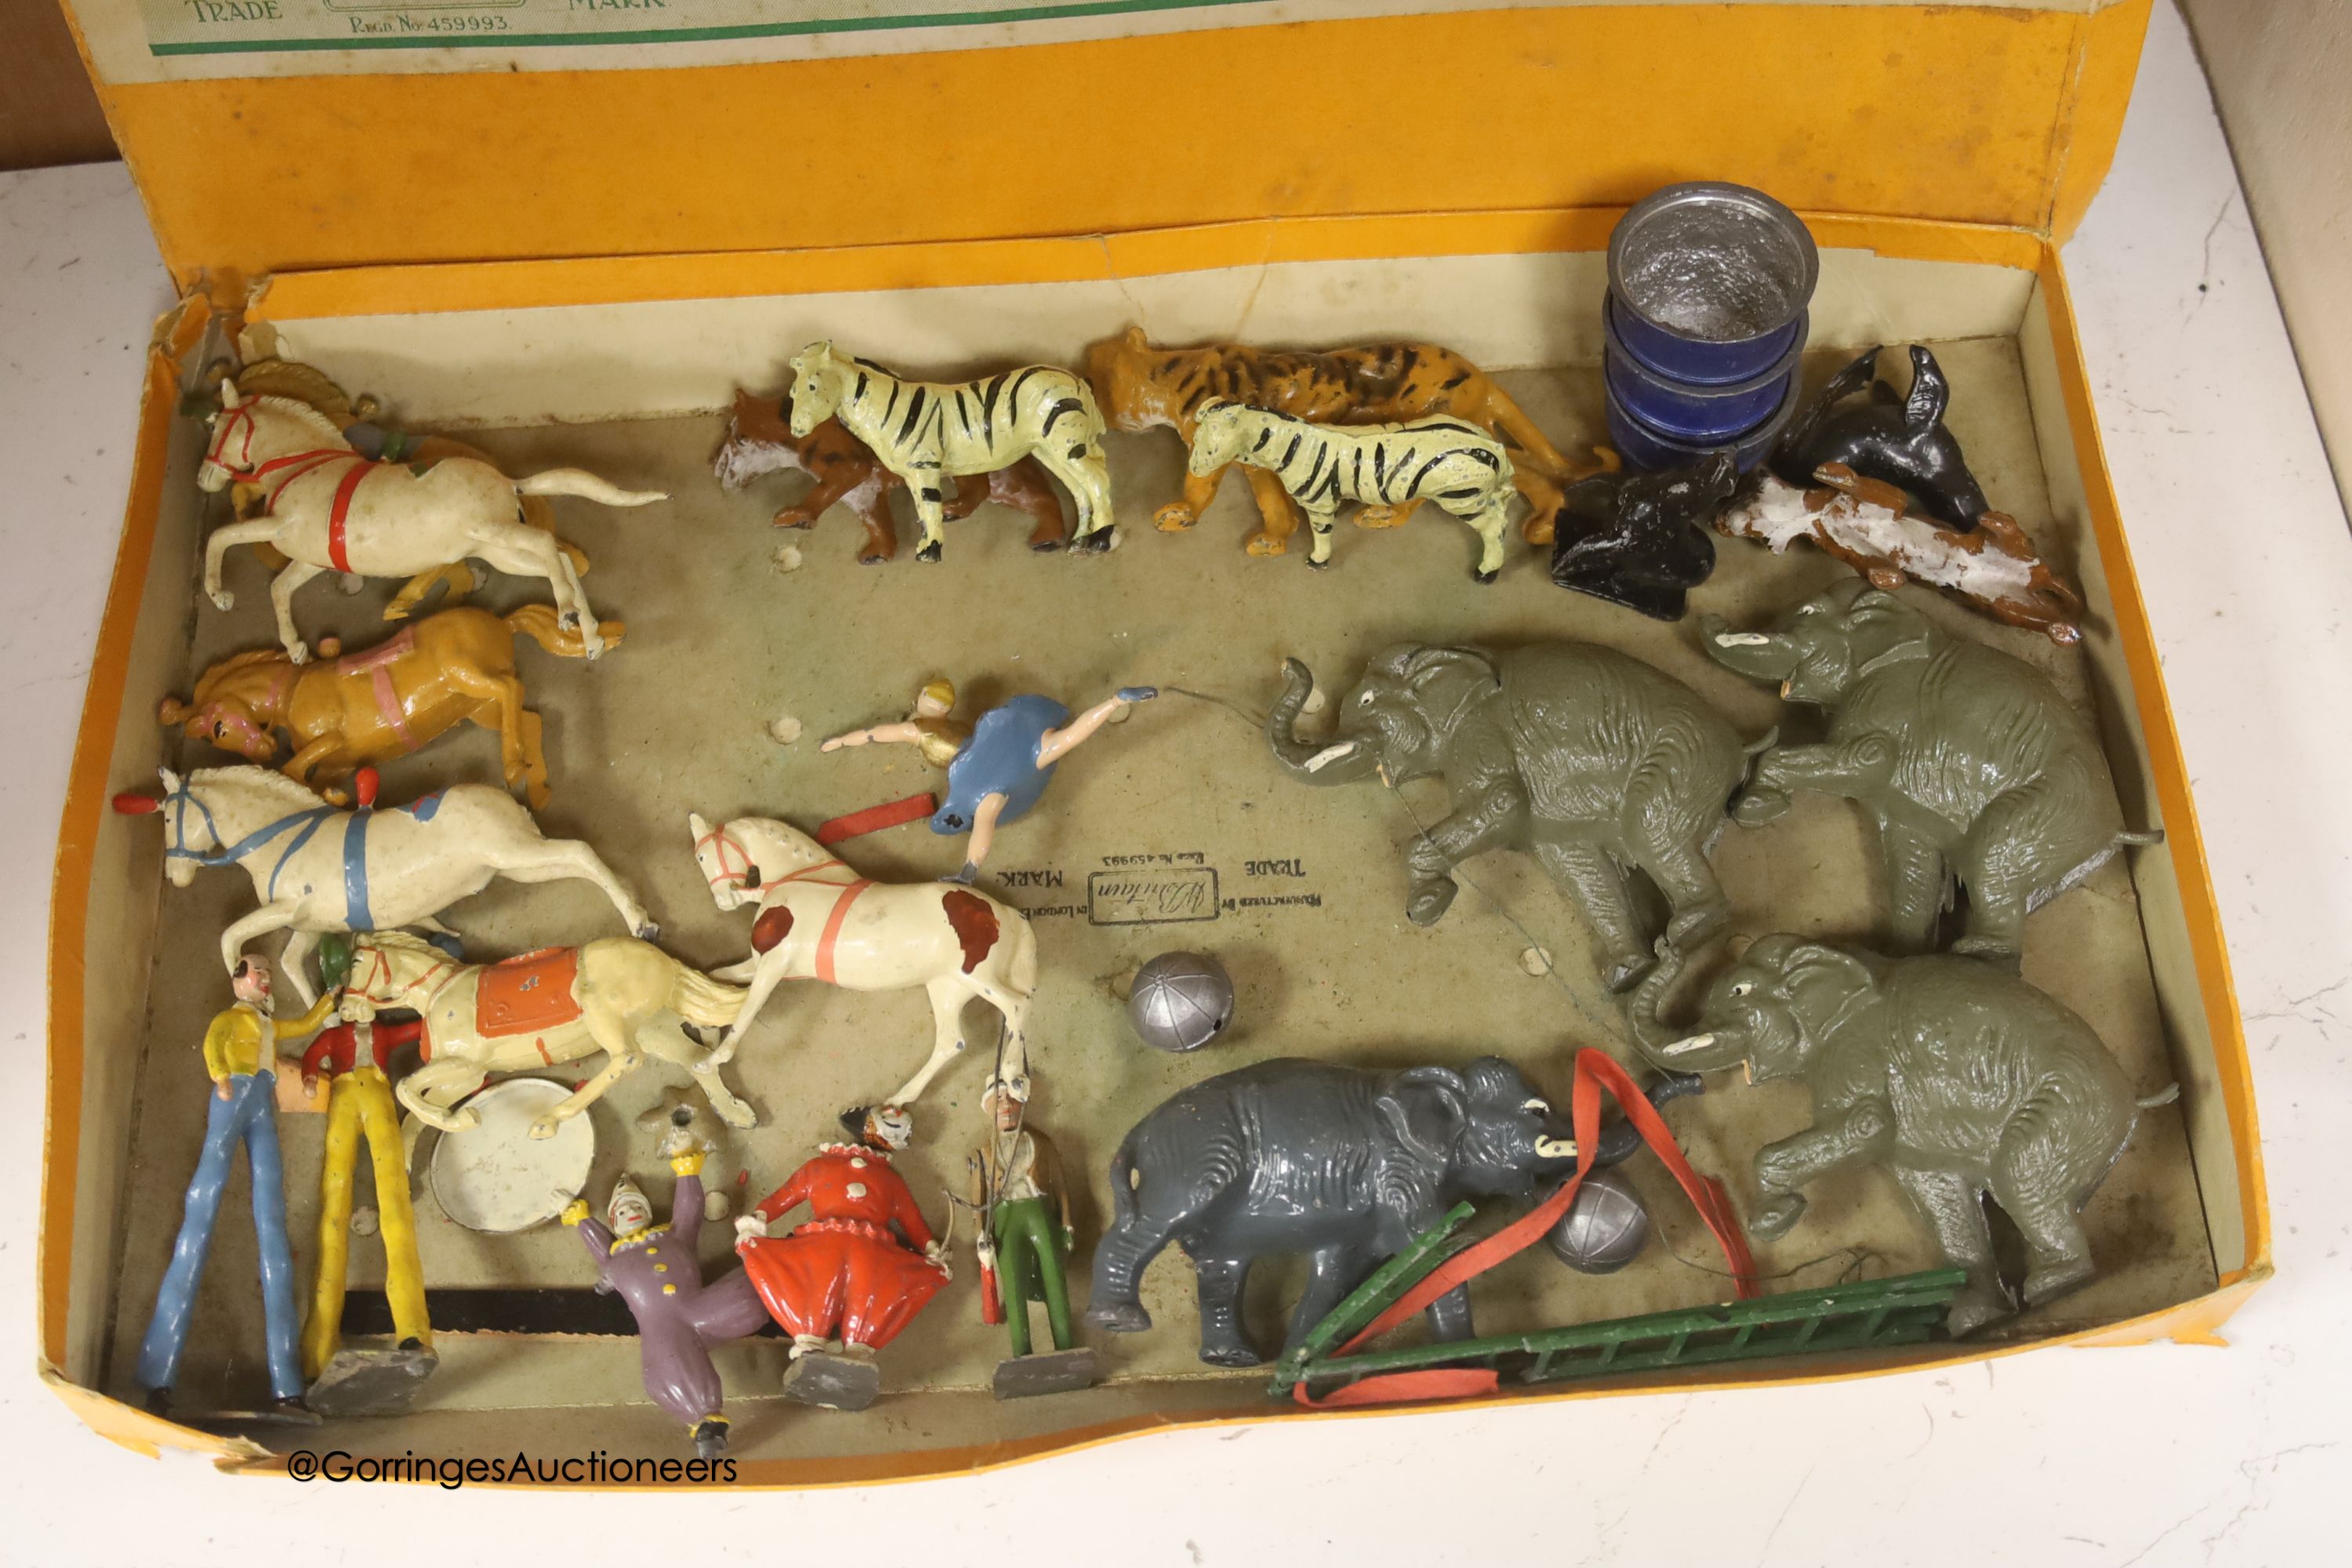 A Britain's Set 1443 Mammoth Circus, 1936-41, in original box and further related items